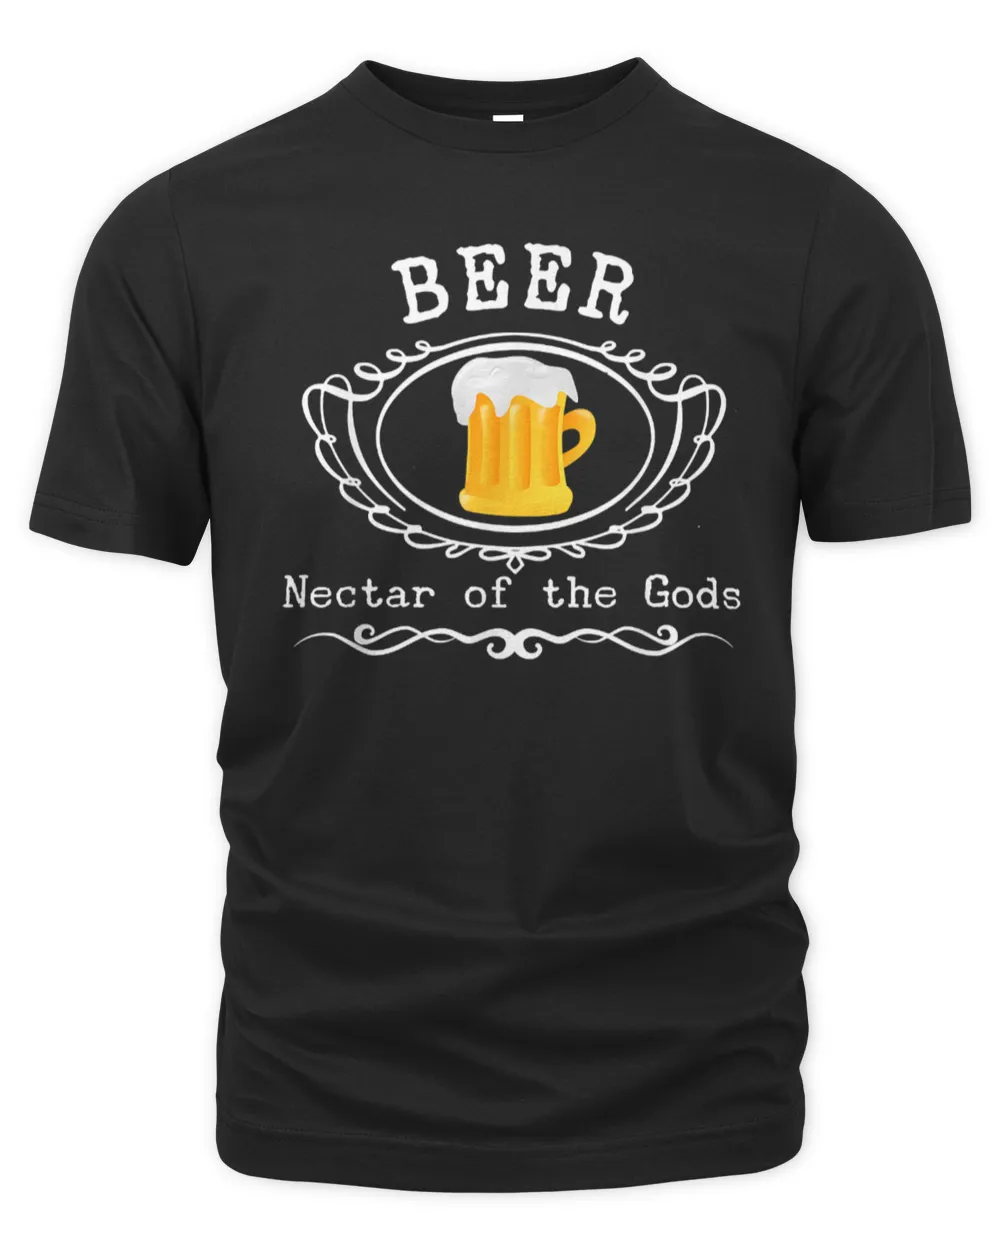 Beer - Nectar of the Gods T-shirt